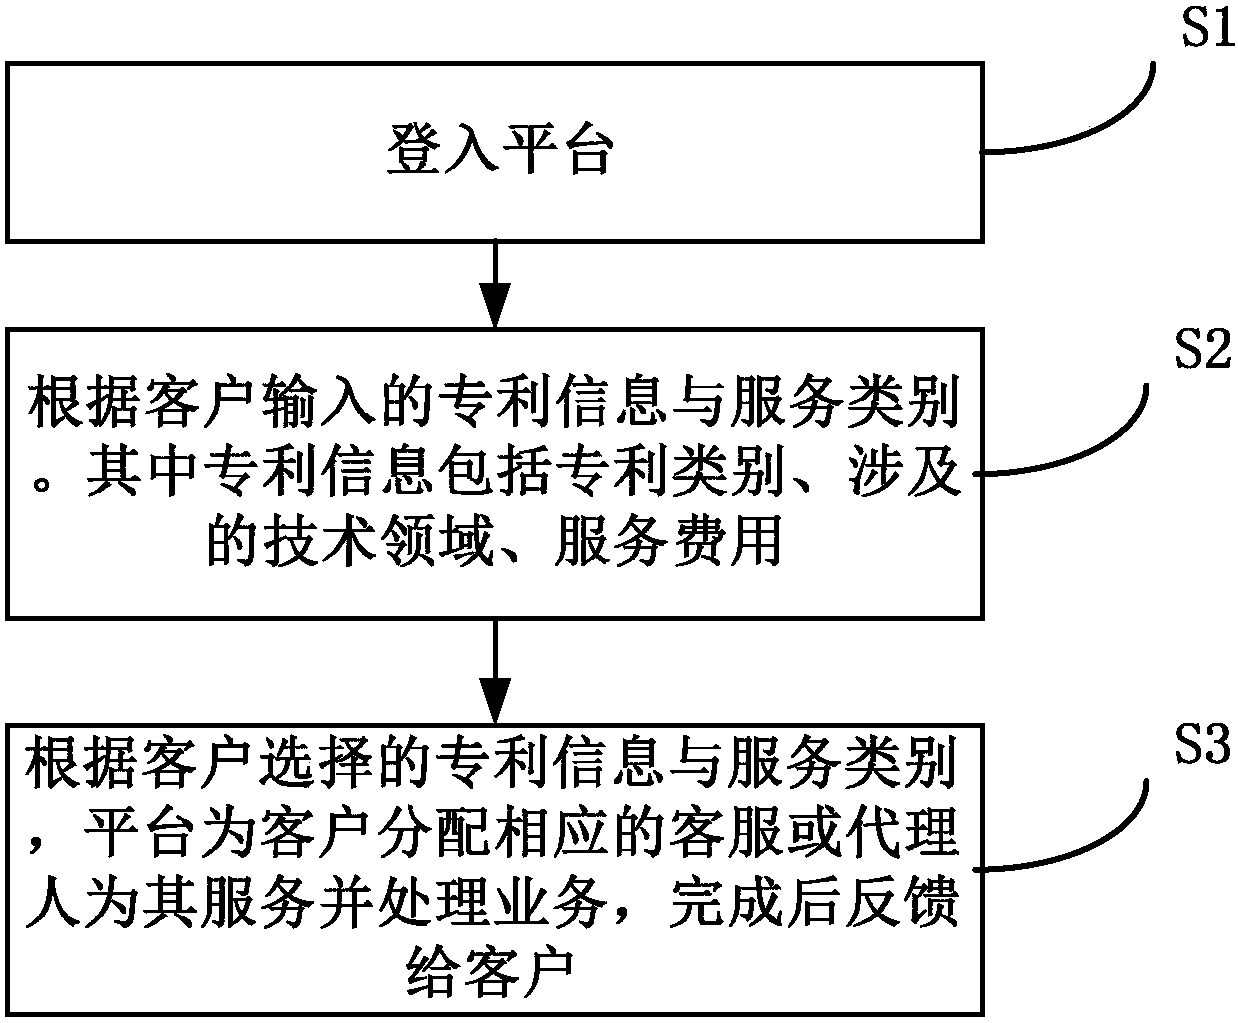 A patent application service system and method